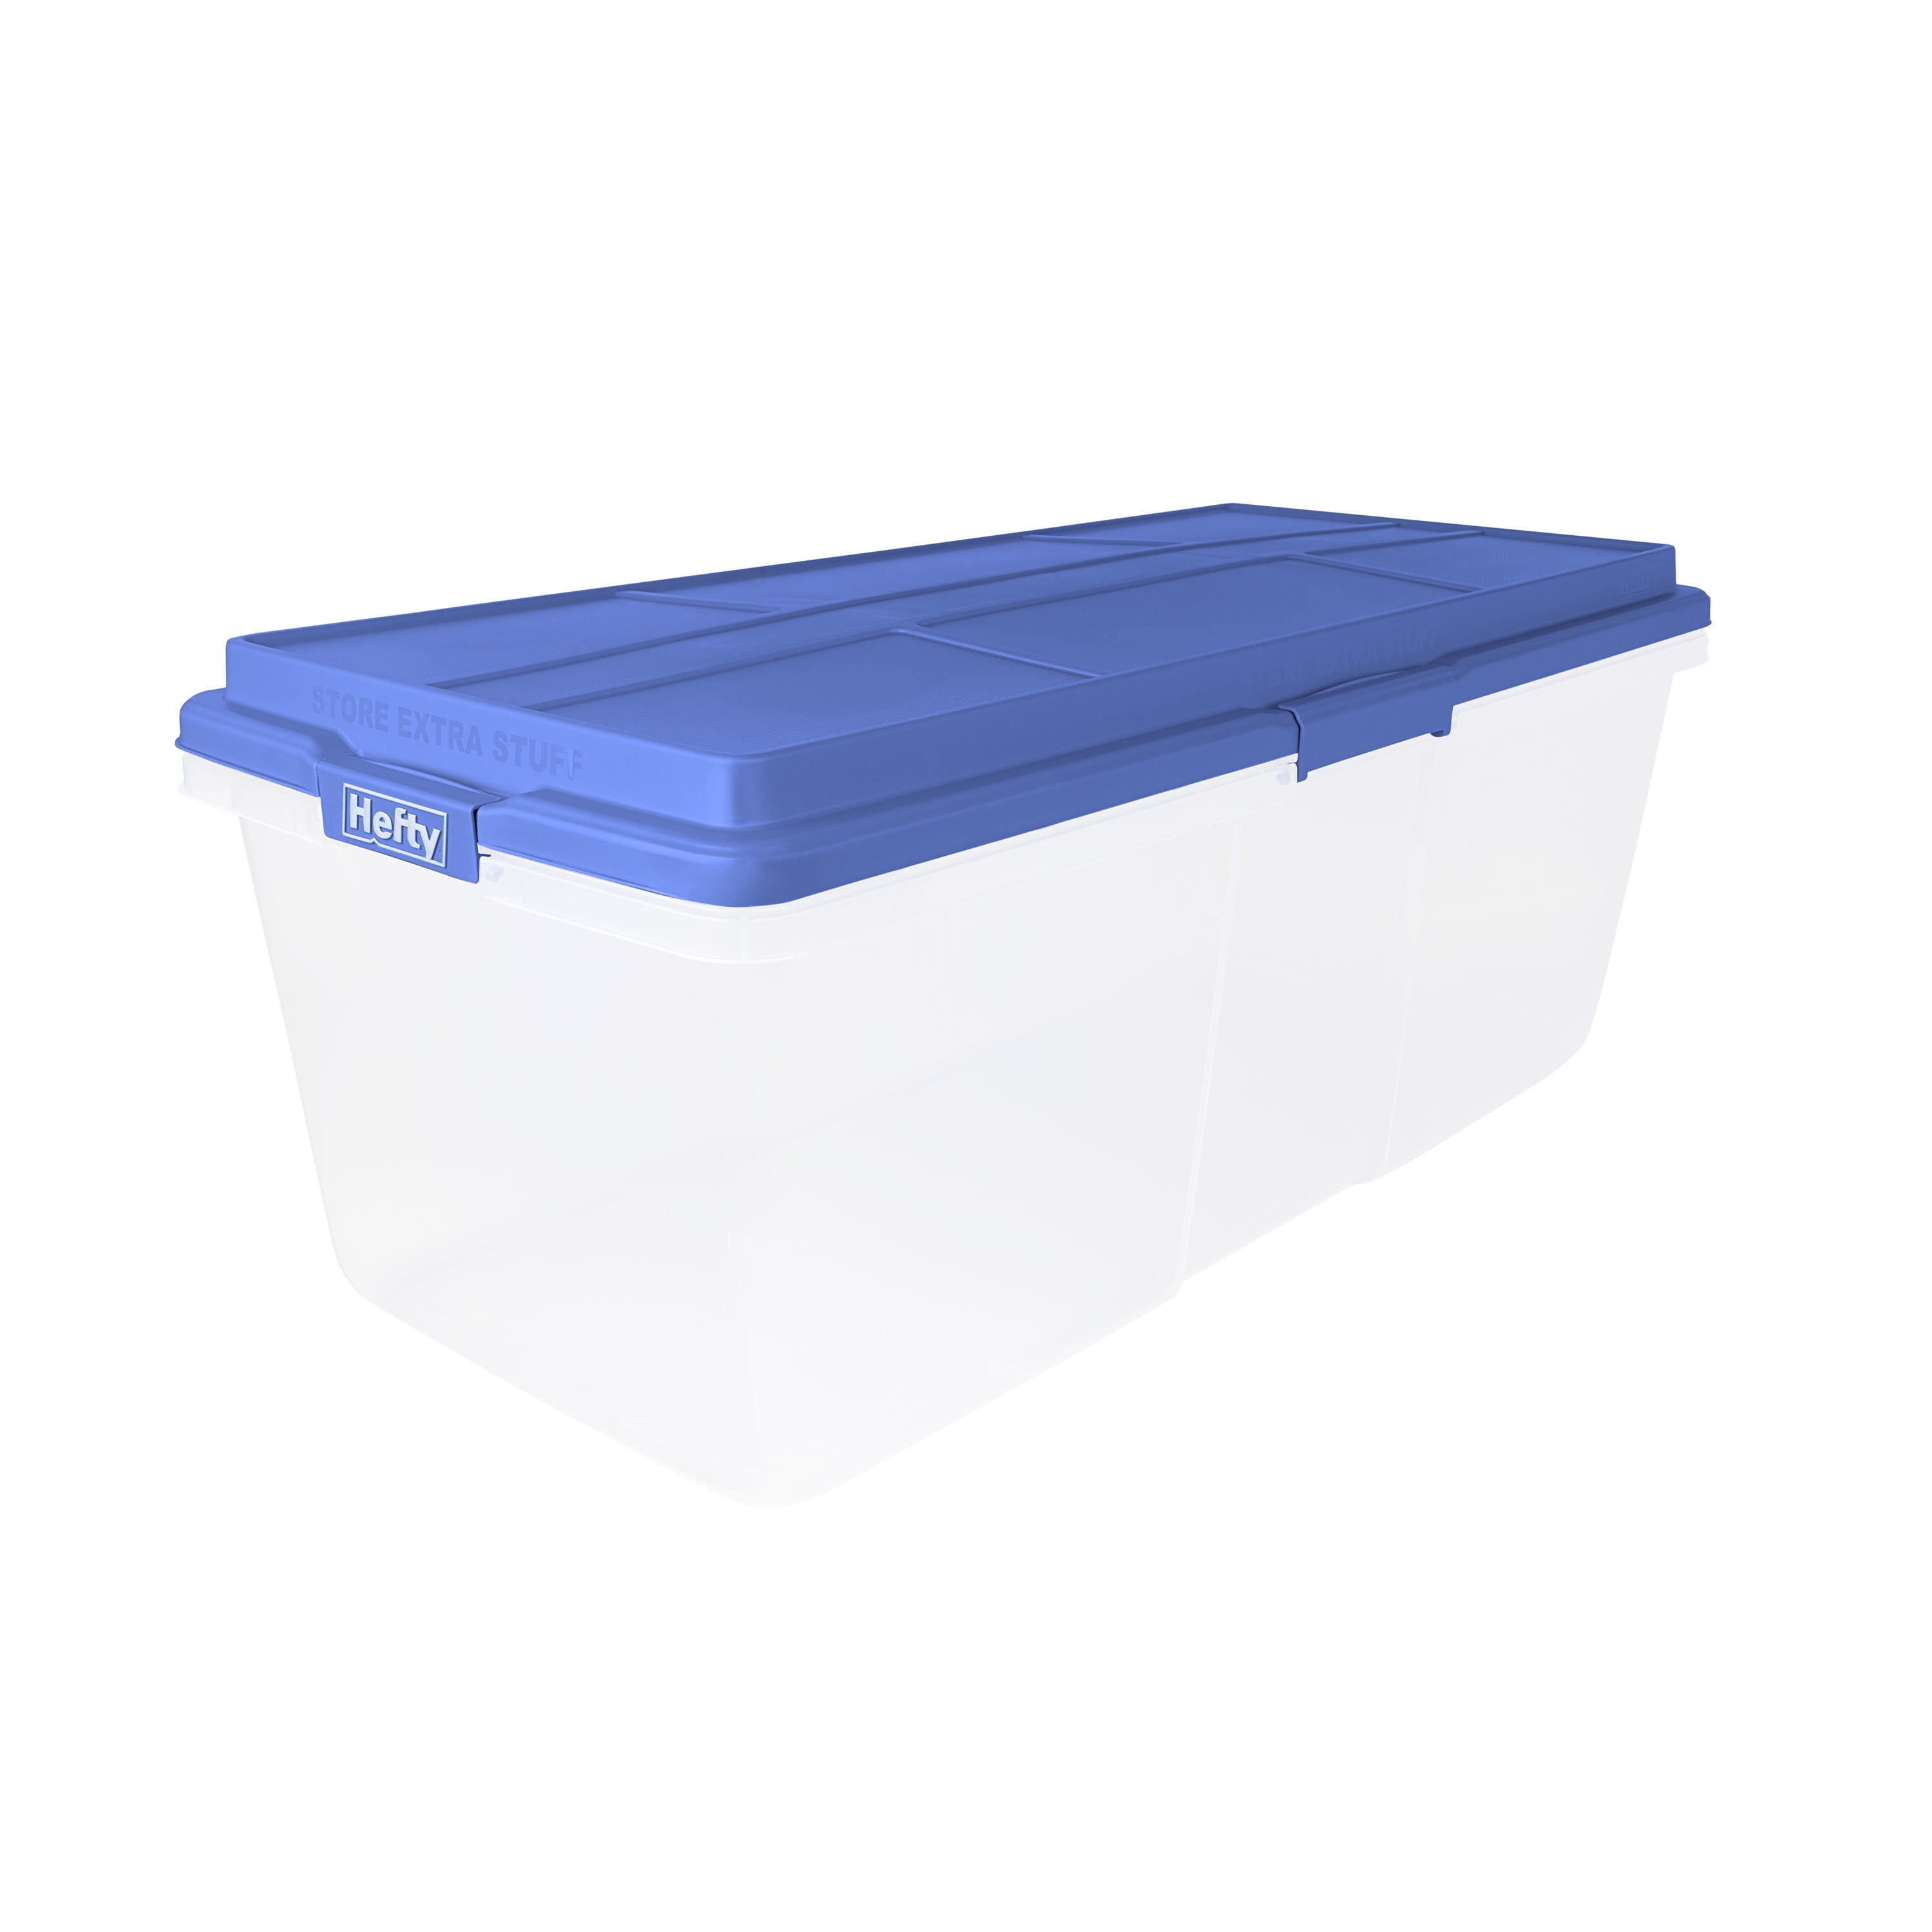 Blue Check Storage Box Includes 12 dividers and clear outside label 